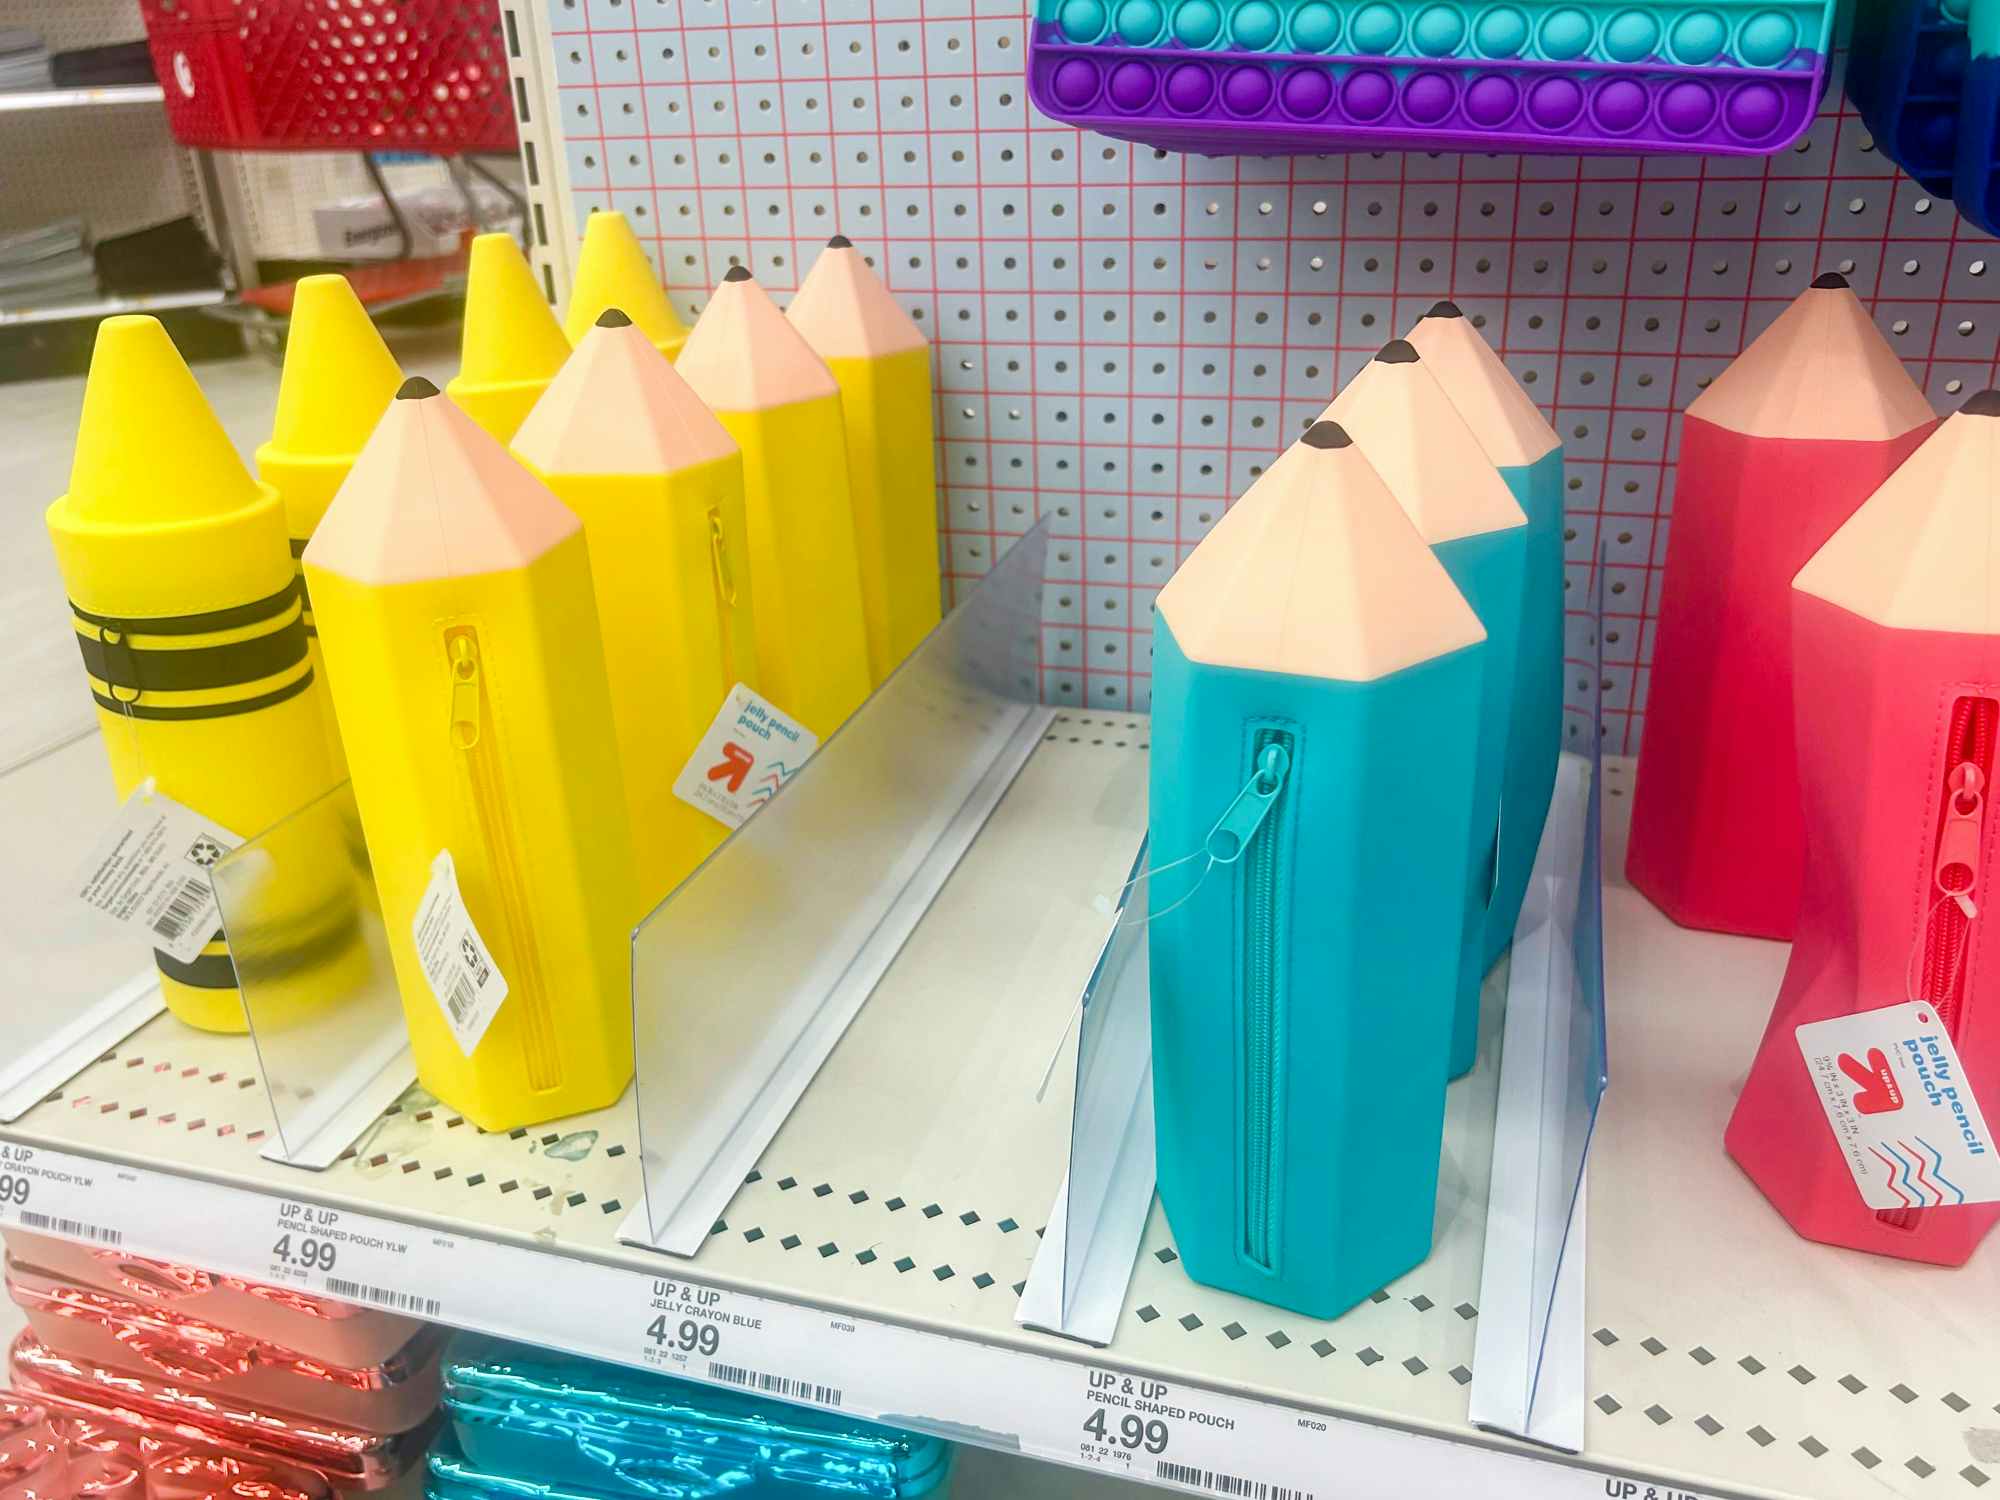 Some fun pencil cases stocked at Target